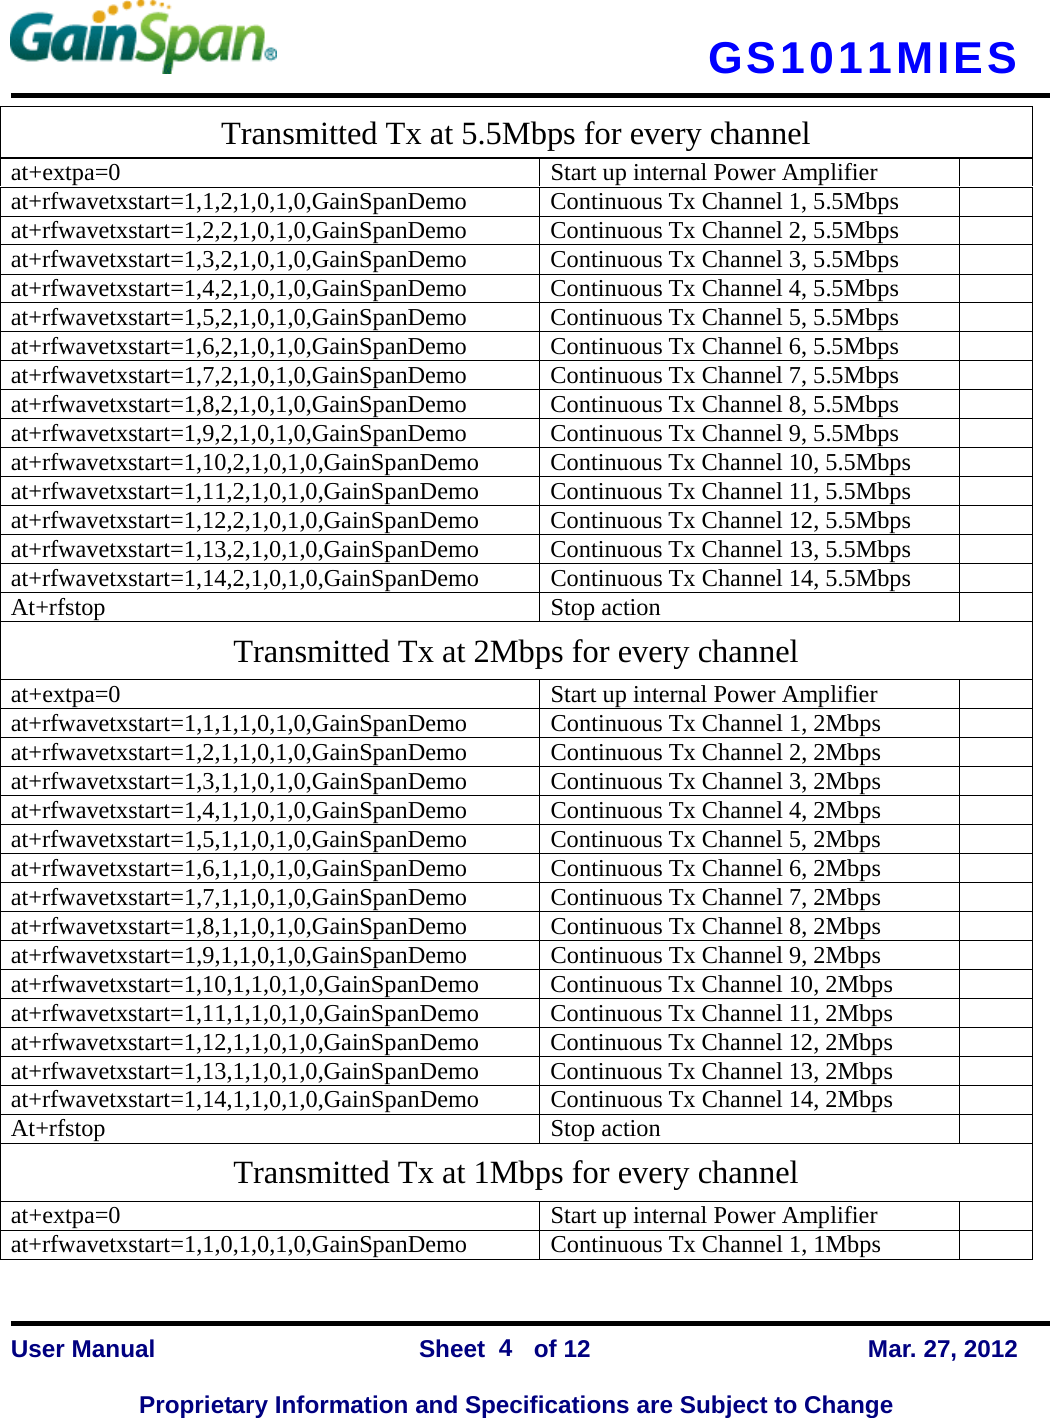   GS1011MIES    User Manual                Sheet    of 12      Mar. 27, 2012  Proprietary Information and Specifications are Subject to Change 4 Transmitted Tx at 5.5Mbps for every channel at+extpa=0  Start up internal Power Amplifier   at+rfwavetxstart=1,1,2,1,0,1,0,GainSpanDemo  Continuous Tx Channel 1, 5.5Mbps   at+rfwavetxstart=1,2,2,1,0,1,0,GainSpanDemo  Continuous Tx Channel 2, 5.5Mbps   at+rfwavetxstart=1,3,2,1,0,1,0,GainSpanDemo  Continuous Tx Channel 3, 5.5Mbps   at+rfwavetxstart=1,4,2,1,0,1,0,GainSpanDemo  Continuous Tx Channel 4, 5.5Mbps   at+rfwavetxstart=1,5,2,1,0,1,0,GainSpanDemo  Continuous Tx Channel 5, 5.5Mbps   at+rfwavetxstart=1,6,2,1,0,1,0,GainSpanDemo  Continuous Tx Channel 6, 5.5Mbps   at+rfwavetxstart=1,7,2,1,0,1,0,GainSpanDemo  Continuous Tx Channel 7, 5.5Mbps   at+rfwavetxstart=1,8,2,1,0,1,0,GainSpanDemo  Continuous Tx Channel 8, 5.5Mbps   at+rfwavetxstart=1,9,2,1,0,1,0,GainSpanDemo  Continuous Tx Channel 9, 5.5Mbps   at+rfwavetxstart=1,10,2,1,0,1,0,GainSpanDemo  Continuous Tx Channel 10, 5.5Mbps   at+rfwavetxstart=1,11,2,1,0,1,0,GainSpanDemo  Continuous Tx Channel 11, 5.5Mbps   at+rfwavetxstart=1,12,2,1,0,1,0,GainSpanDemo  Continuous Tx Channel 12, 5.5Mbps   at+rfwavetxstart=1,13,2,1,0,1,0,GainSpanDemo  Continuous Tx Channel 13, 5.5Mbps   at+rfwavetxstart=1,14,2,1,0,1,0,GainSpanDemo  Continuous Tx Channel 14, 5.5Mbps   At+rfstop Stop action  Transmitted Tx at 2Mbps for every channel at+extpa=0  Start up internal Power Amplifier   at+rfwavetxstart=1,1,1,1,0,1,0,GainSpanDemo  Continuous Tx Channel 1, 2Mbps   at+rfwavetxstart=1,2,1,1,0,1,0,GainSpanDemo  Continuous Tx Channel 2, 2Mbps   at+rfwavetxstart=1,3,1,1,0,1,0,GainSpanDemo  Continuous Tx Channel 3, 2Mbps   at+rfwavetxstart=1,4,1,1,0,1,0,GainSpanDemo  Continuous Tx Channel 4, 2Mbps   at+rfwavetxstart=1,5,1,1,0,1,0,GainSpanDemo  Continuous Tx Channel 5, 2Mbps   at+rfwavetxstart=1,6,1,1,0,1,0,GainSpanDemo  Continuous Tx Channel 6, 2Mbps   at+rfwavetxstart=1,7,1,1,0,1,0,GainSpanDemo  Continuous Tx Channel 7, 2Mbps   at+rfwavetxstart=1,8,1,1,0,1,0,GainSpanDemo  Continuous Tx Channel 8, 2Mbps   at+rfwavetxstart=1,9,1,1,0,1,0,GainSpanDemo  Continuous Tx Channel 9, 2Mbps   at+rfwavetxstart=1,10,1,1,0,1,0,GainSpanDemo  Continuous Tx Channel 10, 2Mbps   at+rfwavetxstart=1,11,1,1,0,1,0,GainSpanDemo  Continuous Tx Channel 11, 2Mbps   at+rfwavetxstart=1,12,1,1,0,1,0,GainSpanDemo  Continuous Tx Channel 12, 2Mbps   at+rfwavetxstart=1,13,1,1,0,1,0,GainSpanDemo  Continuous Tx Channel 13, 2Mbps   at+rfwavetxstart=1,14,1,1,0,1,0,GainSpanDemo  Continuous Tx Channel 14, 2Mbps   At+rfstop Stop action  Transmitted Tx at 1Mbps for every channel at+extpa=0  Start up internal Power Amplifier   at+rfwavetxstart=1,1,0,1,0,1,0,GainSpanDemo  Continuous Tx Channel 1, 1Mbps   